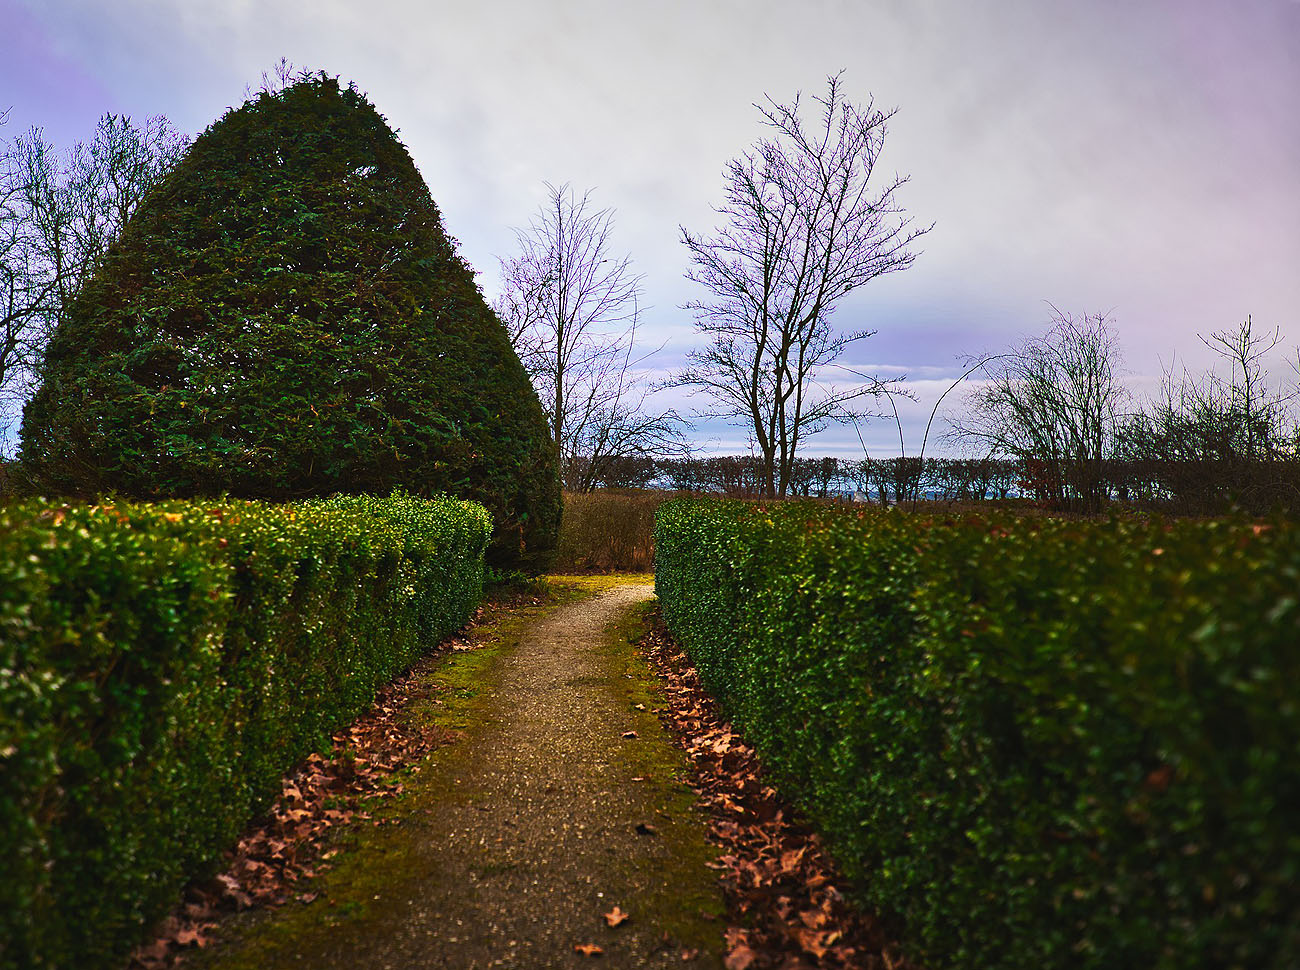 Hedge cutting we identify a cutting schedule for all hedges and follow it closely throughout the year. If a hedge is left for too long without cutting it will outgrow its shape and thereafter be very difficult to restore. We will replace any dead hedging when necessary.